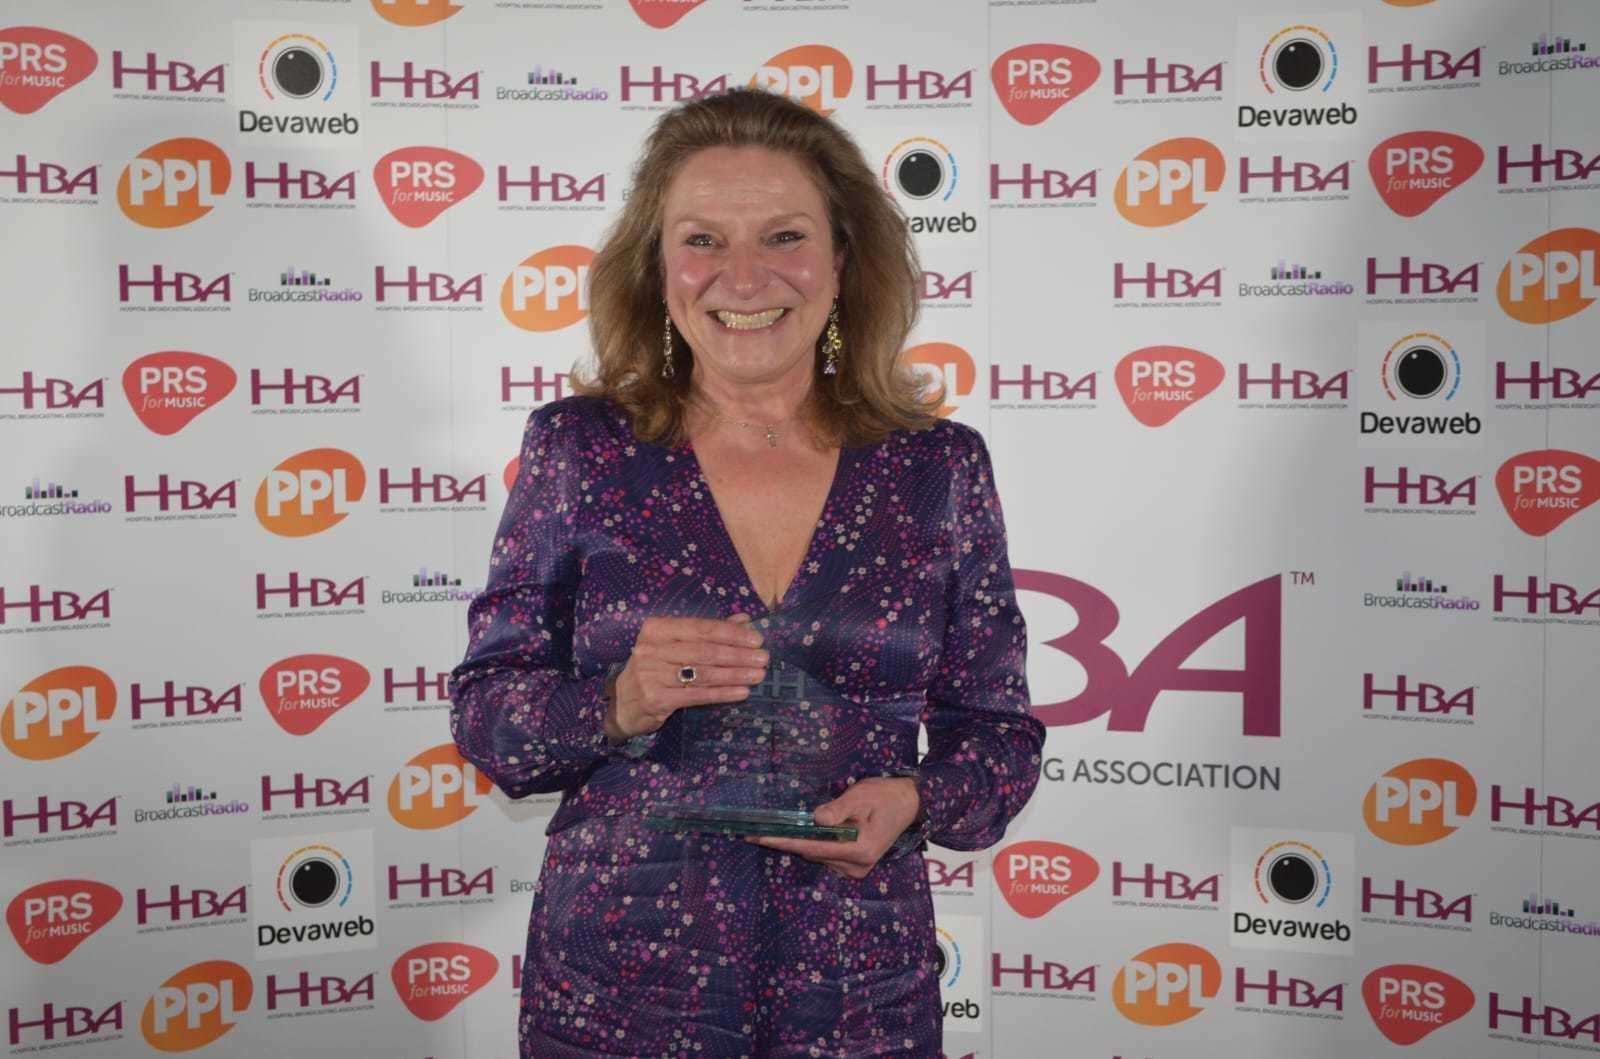 Virginia Irvine-Fortescue with her award for Best Presenter of the Year.